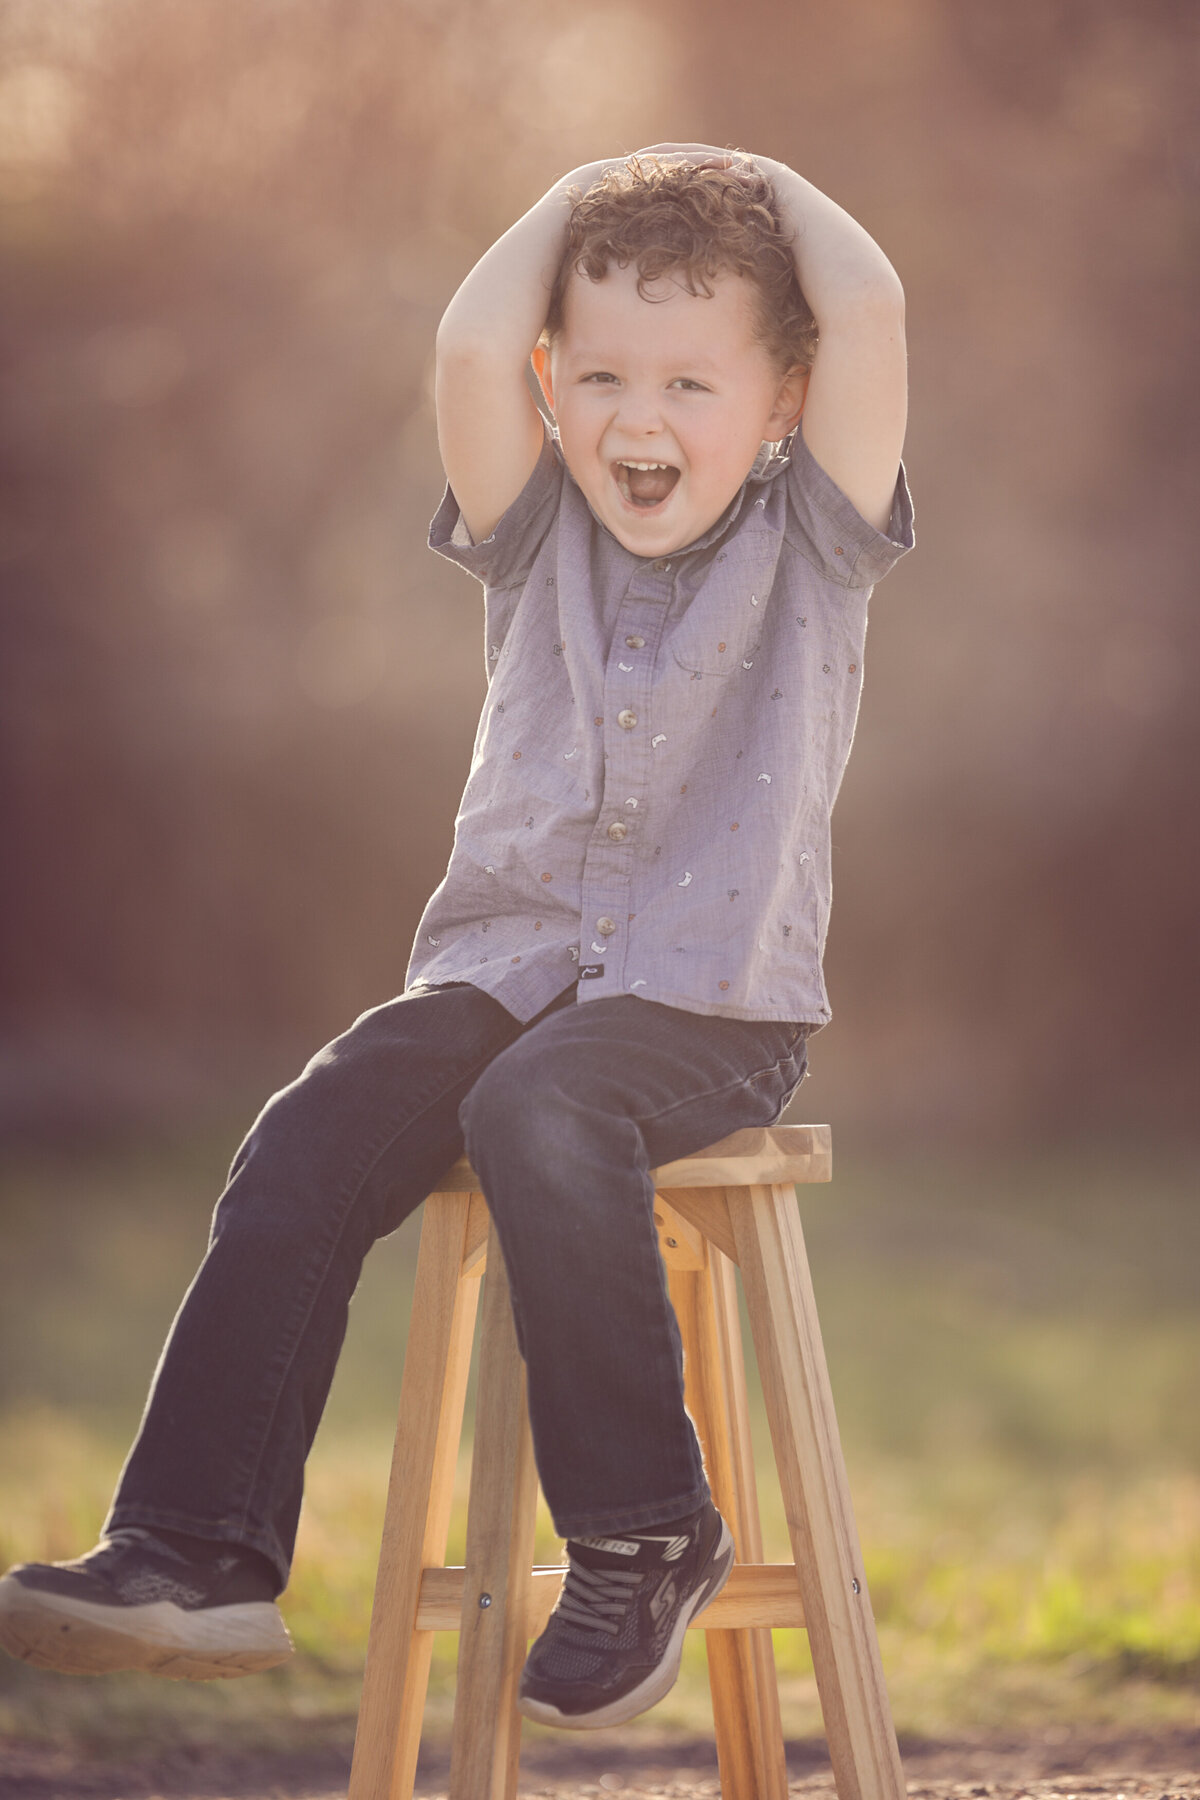 Family-Photos-photography-photographer-yvonne-min-boy-laugh-stool-location-park-outside-natural-light-golden-hour-sunset-erie-brighton-denver-north-colorado-arvada-northglenn-westminster-broomfield-kids-son-love-images-canon-34